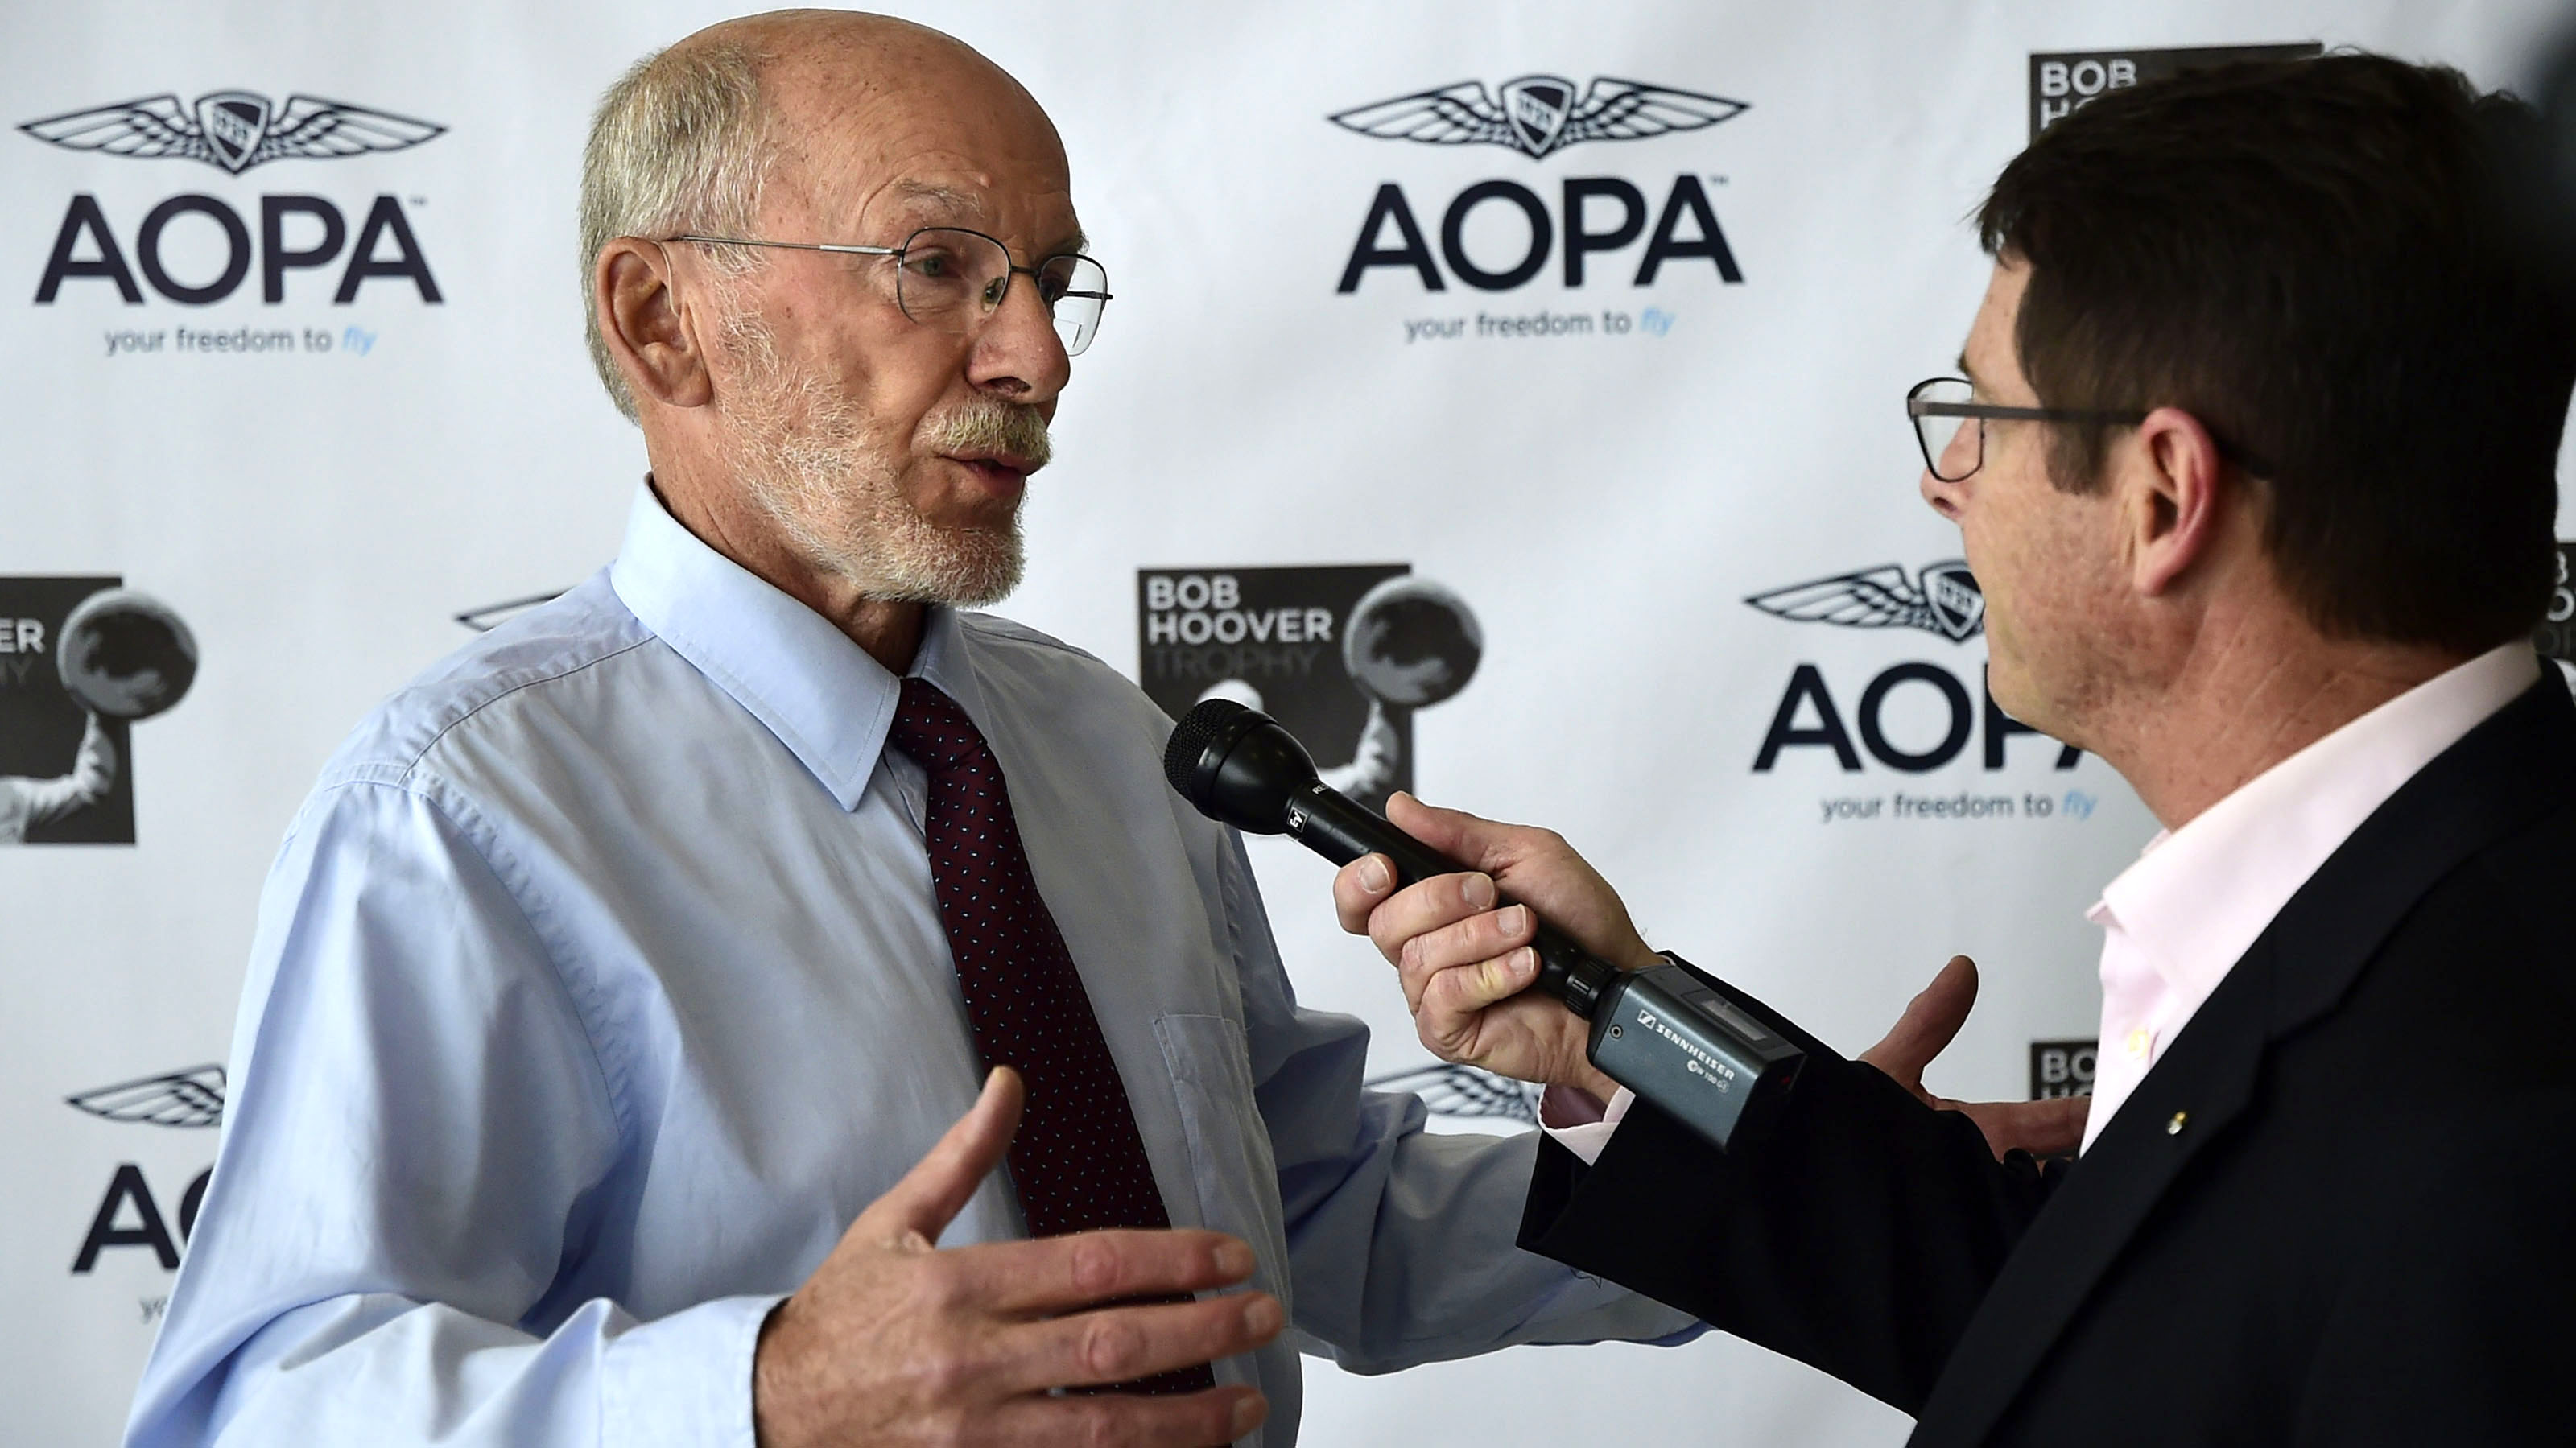 Ron Dearborn of Alaska, the Sharples Award winner, is interviewed for AOPA Live during the third annual R.A. 'Bob' Hoover Trophy reception presented by AOPA in the Terminal A lobby of Ronald Reagan Washington National Airport in Washington, D.C., March 21, 2018. Photo by David Tulis.